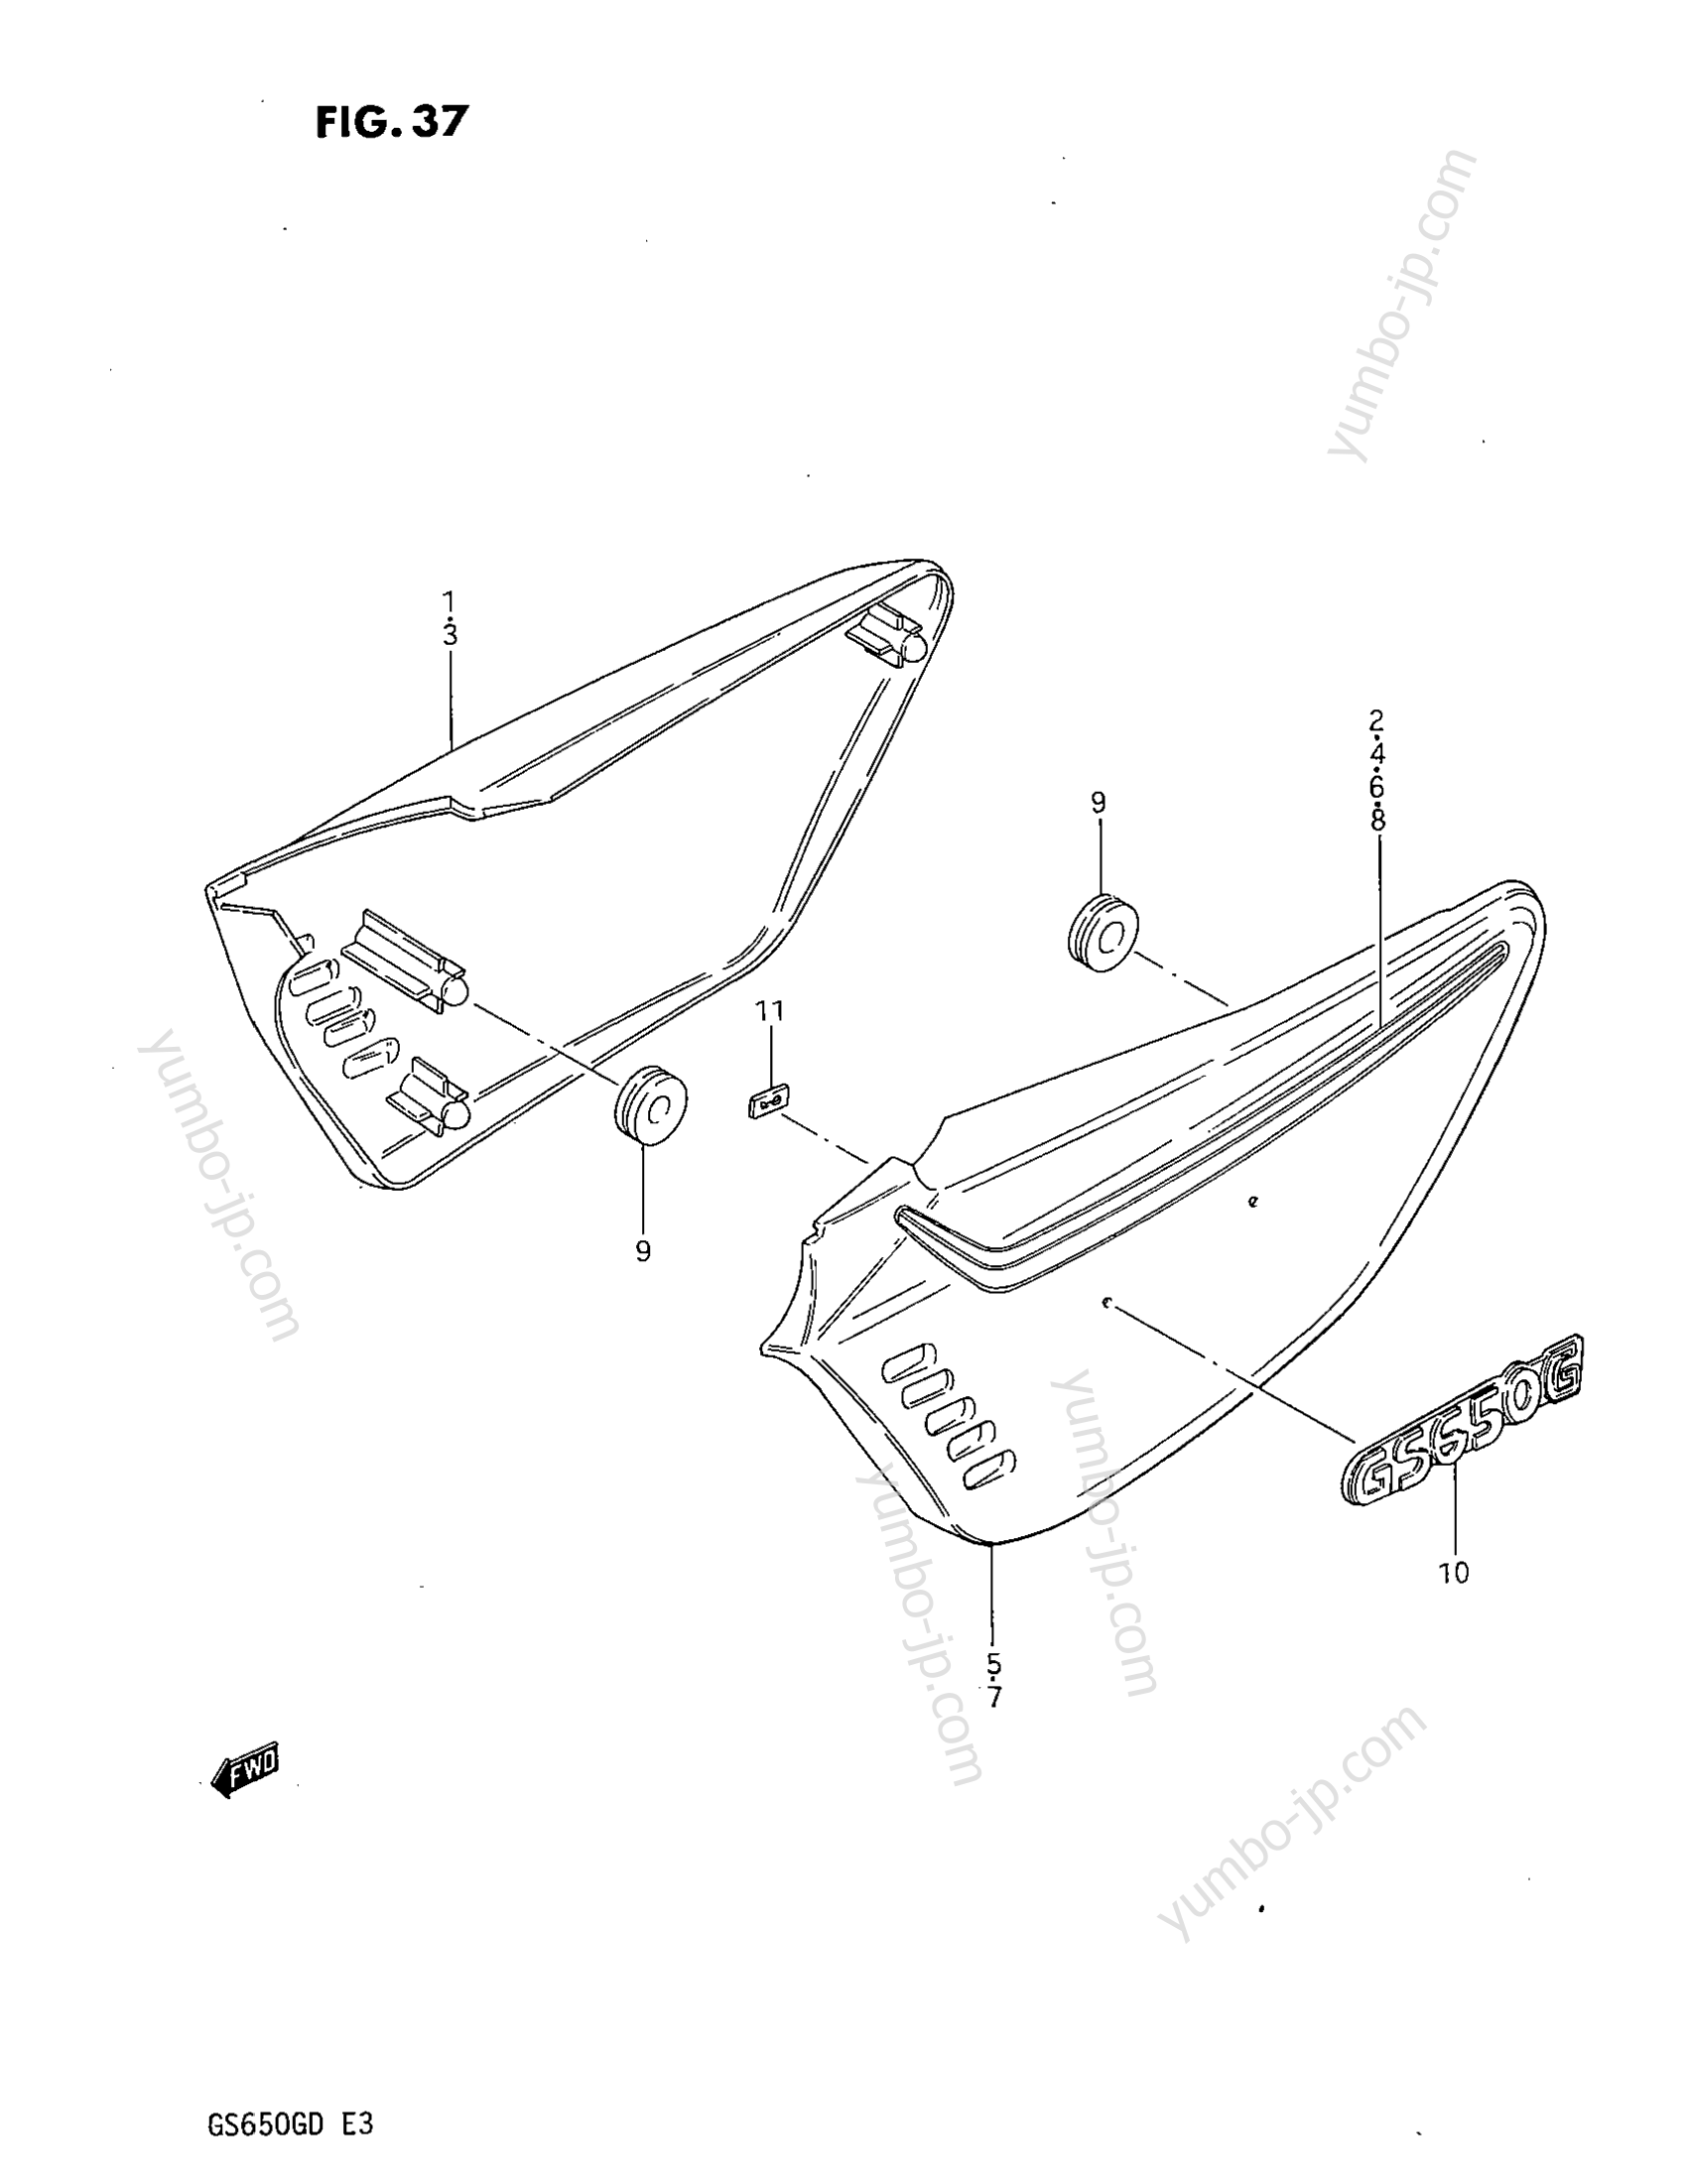 FRAME COVER for motorcycles SUZUKI GS650G 1983 year